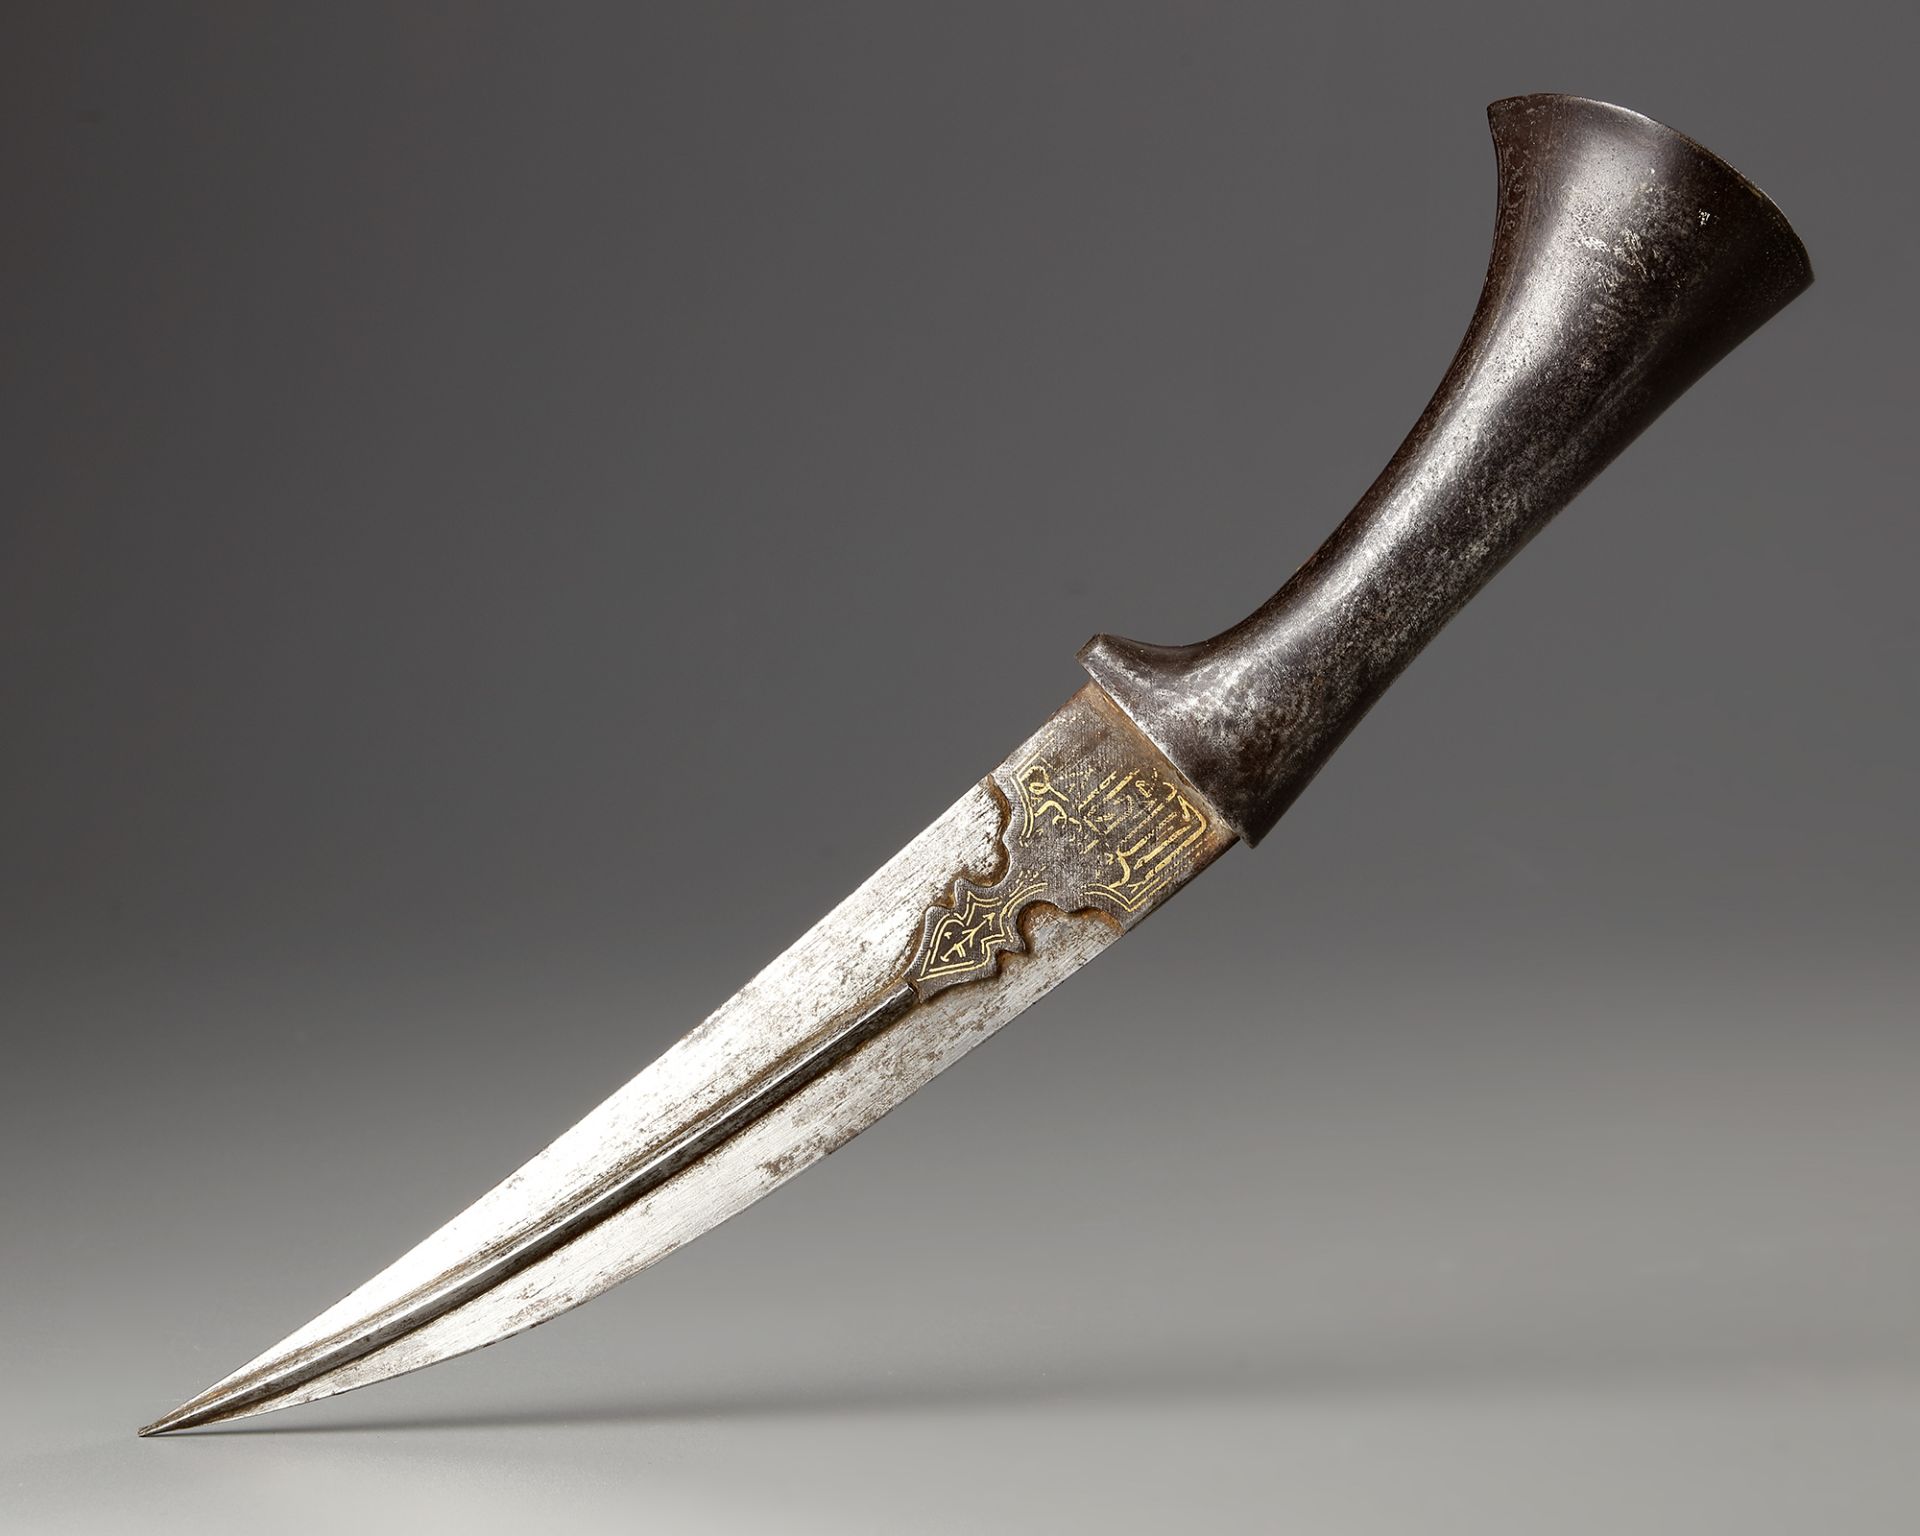 A MUGHAL DAGGER AND SHEATH MADE FOR THE OTTOMAN MARKET, DECCAN 18TH CENTURY